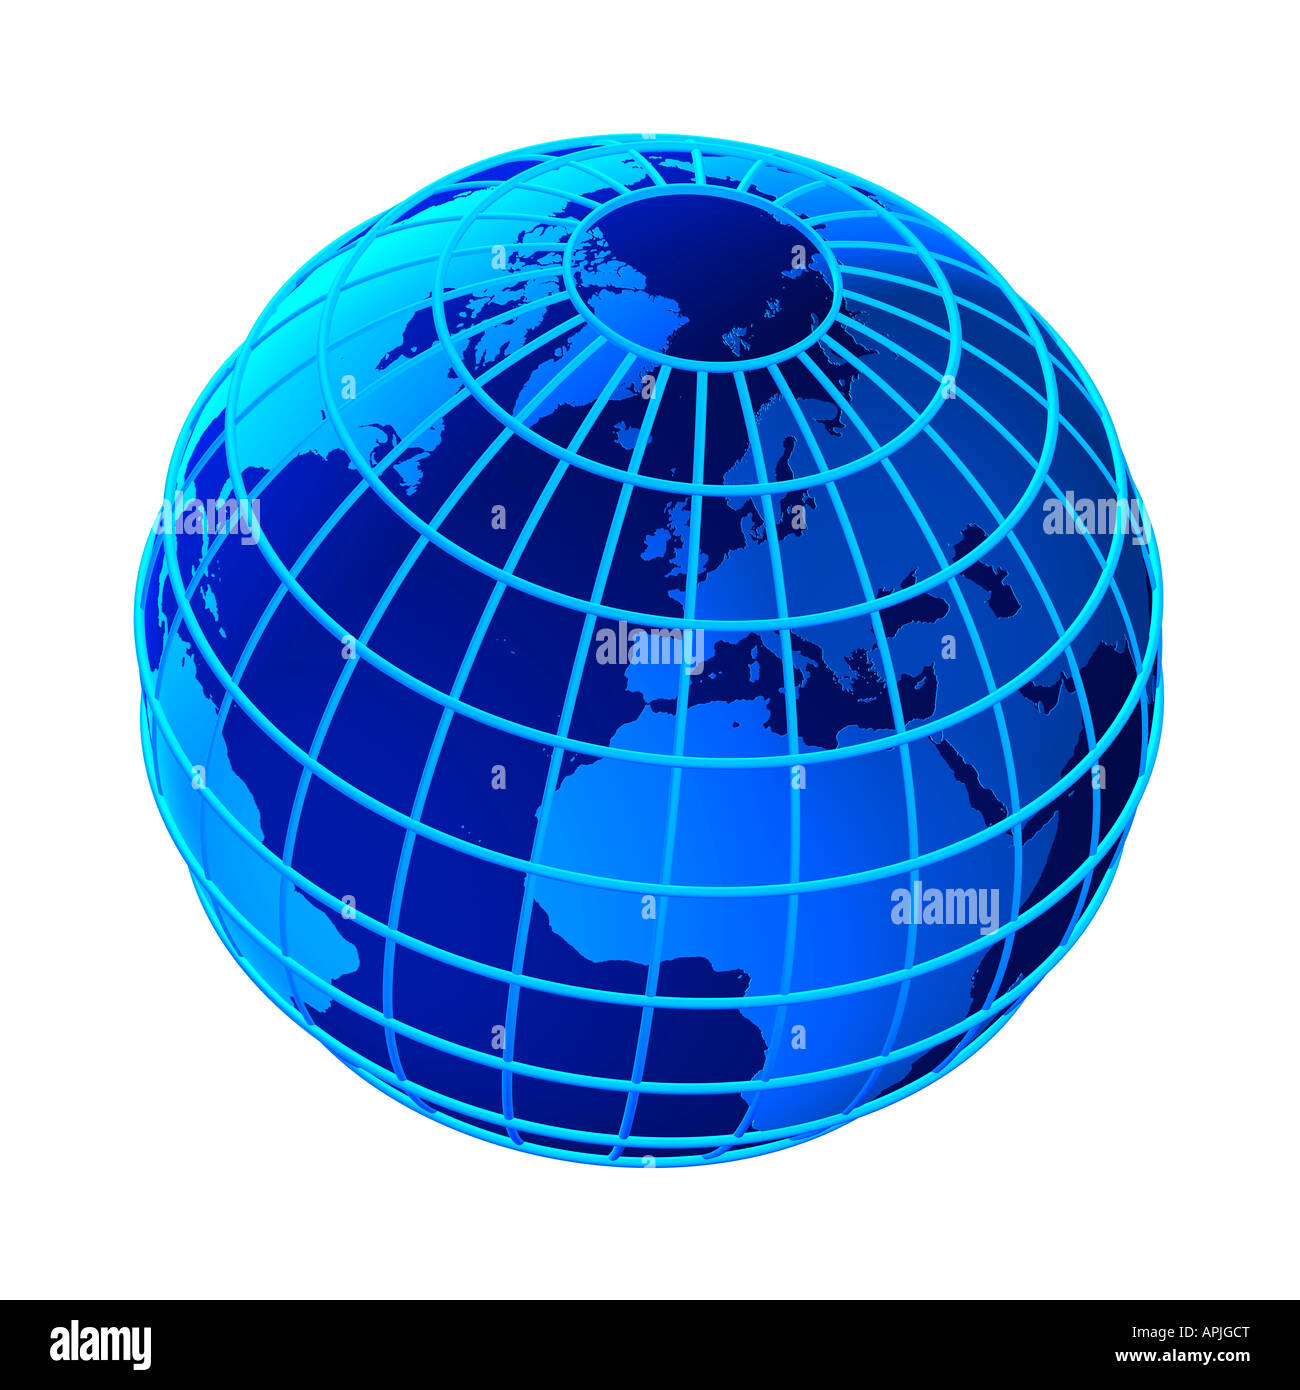 Blue globe with grid against a white background. Stock Photo